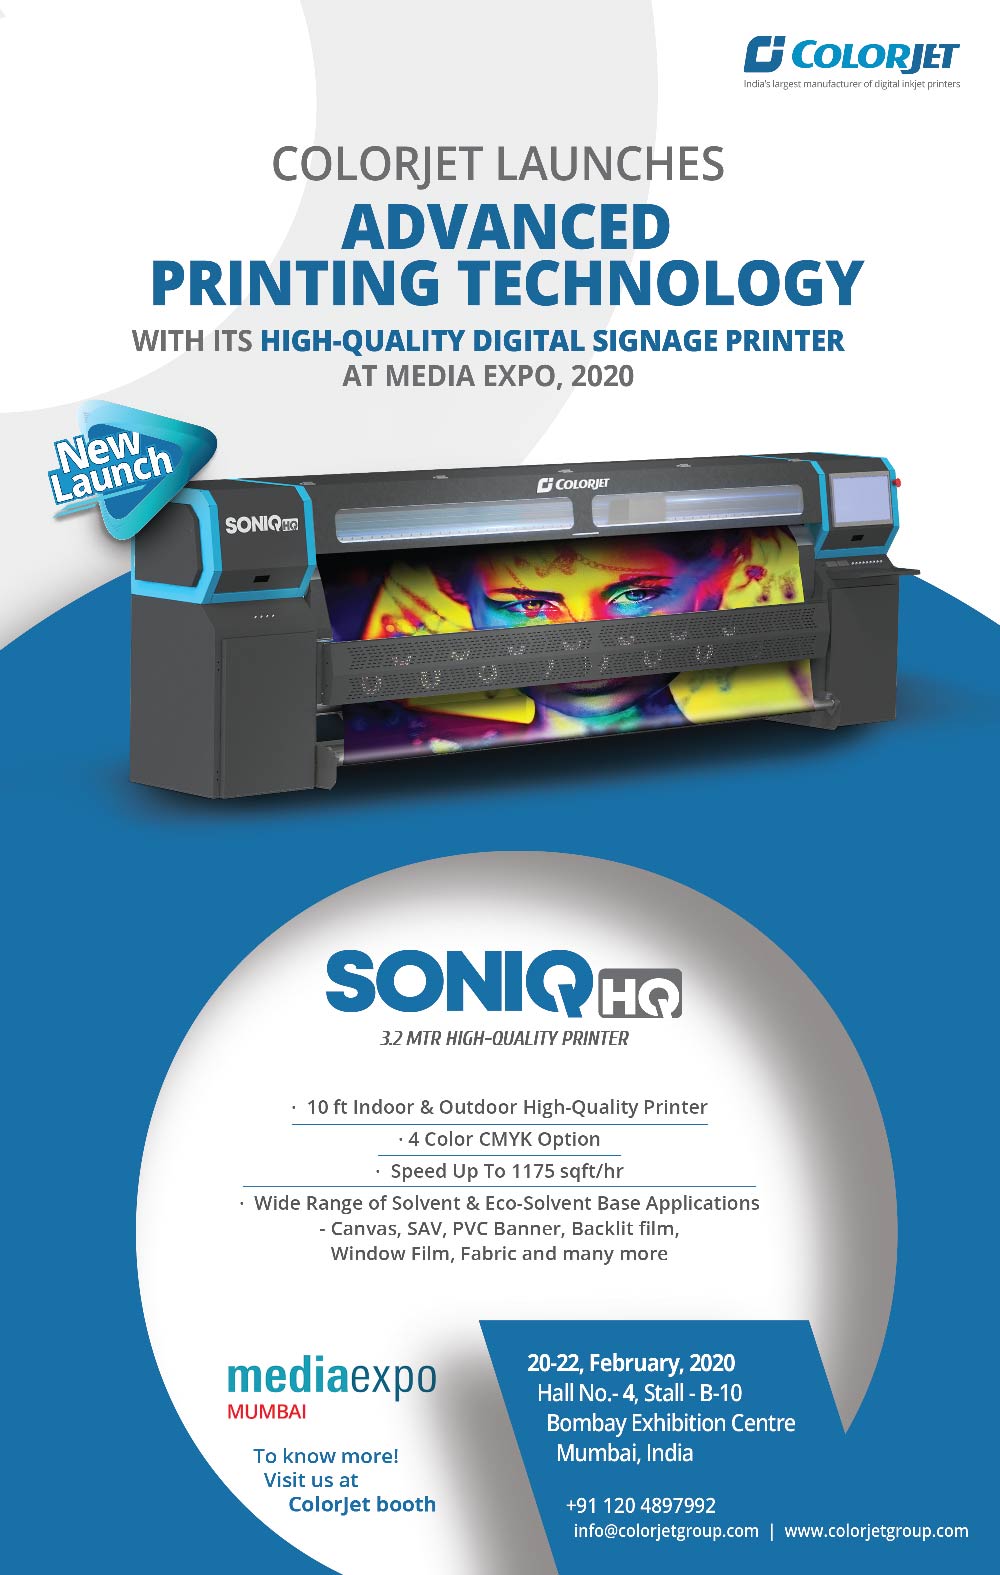 COLORJET on Twitter: "ColorJet to a breakthrough product in High-Quality digital printing with its Eco Solvent Printer- SONIQ HQ, at Media Mumbai- 2020. For Product Info visit: https://t.co/ZqUPEowNmu #